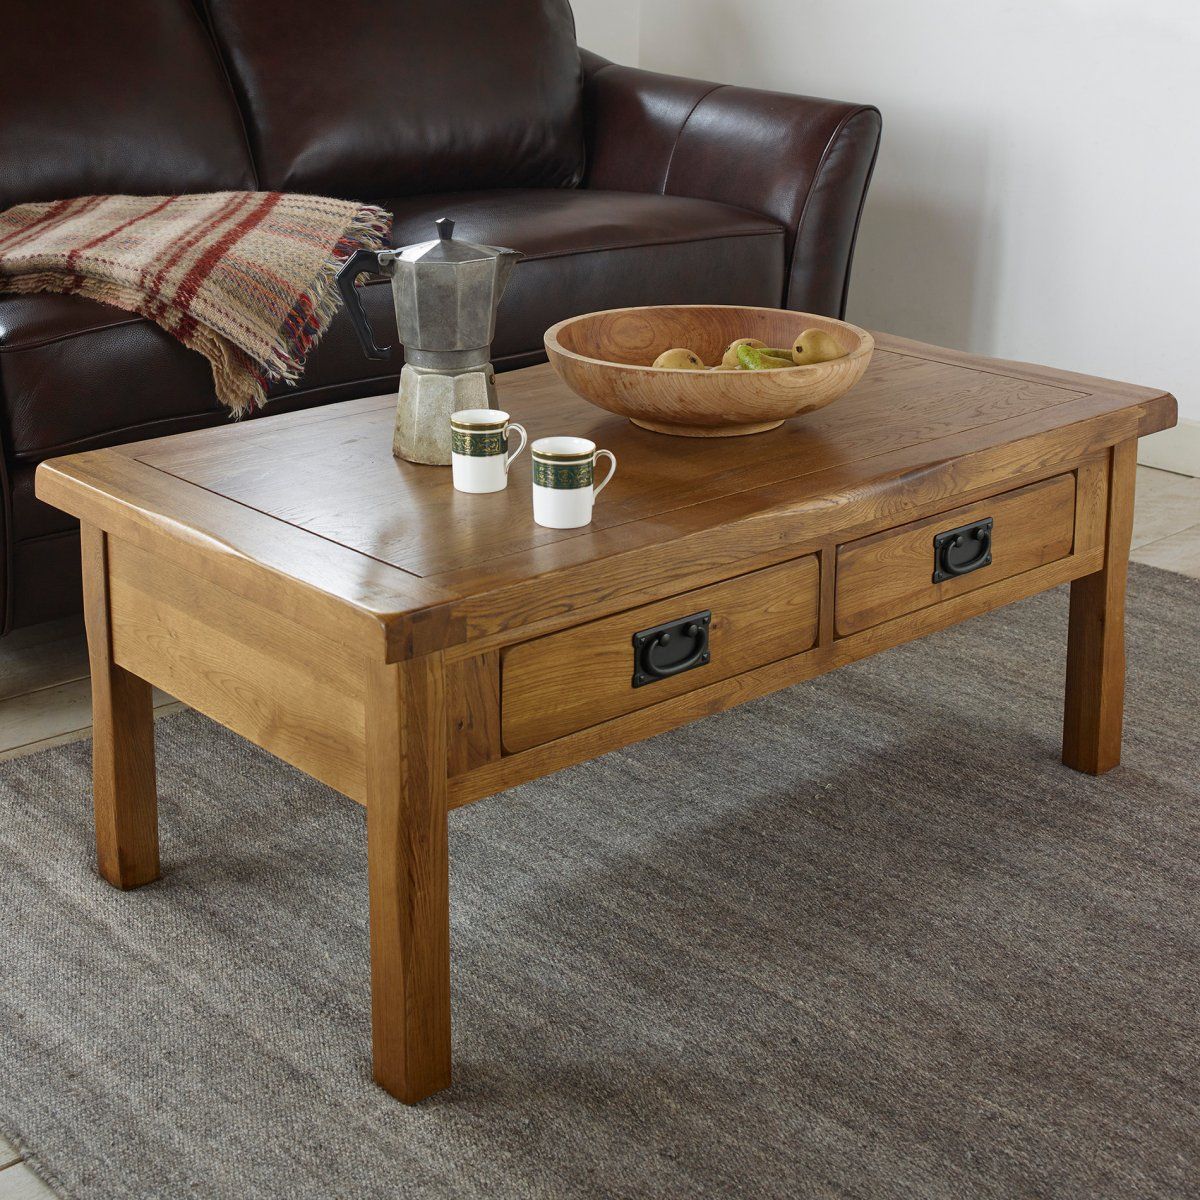 Original Rustic 4 Drawer Coffee Table In Solid Oak With Rustic Wood Coffee Tables (Gallery 11 of 21)